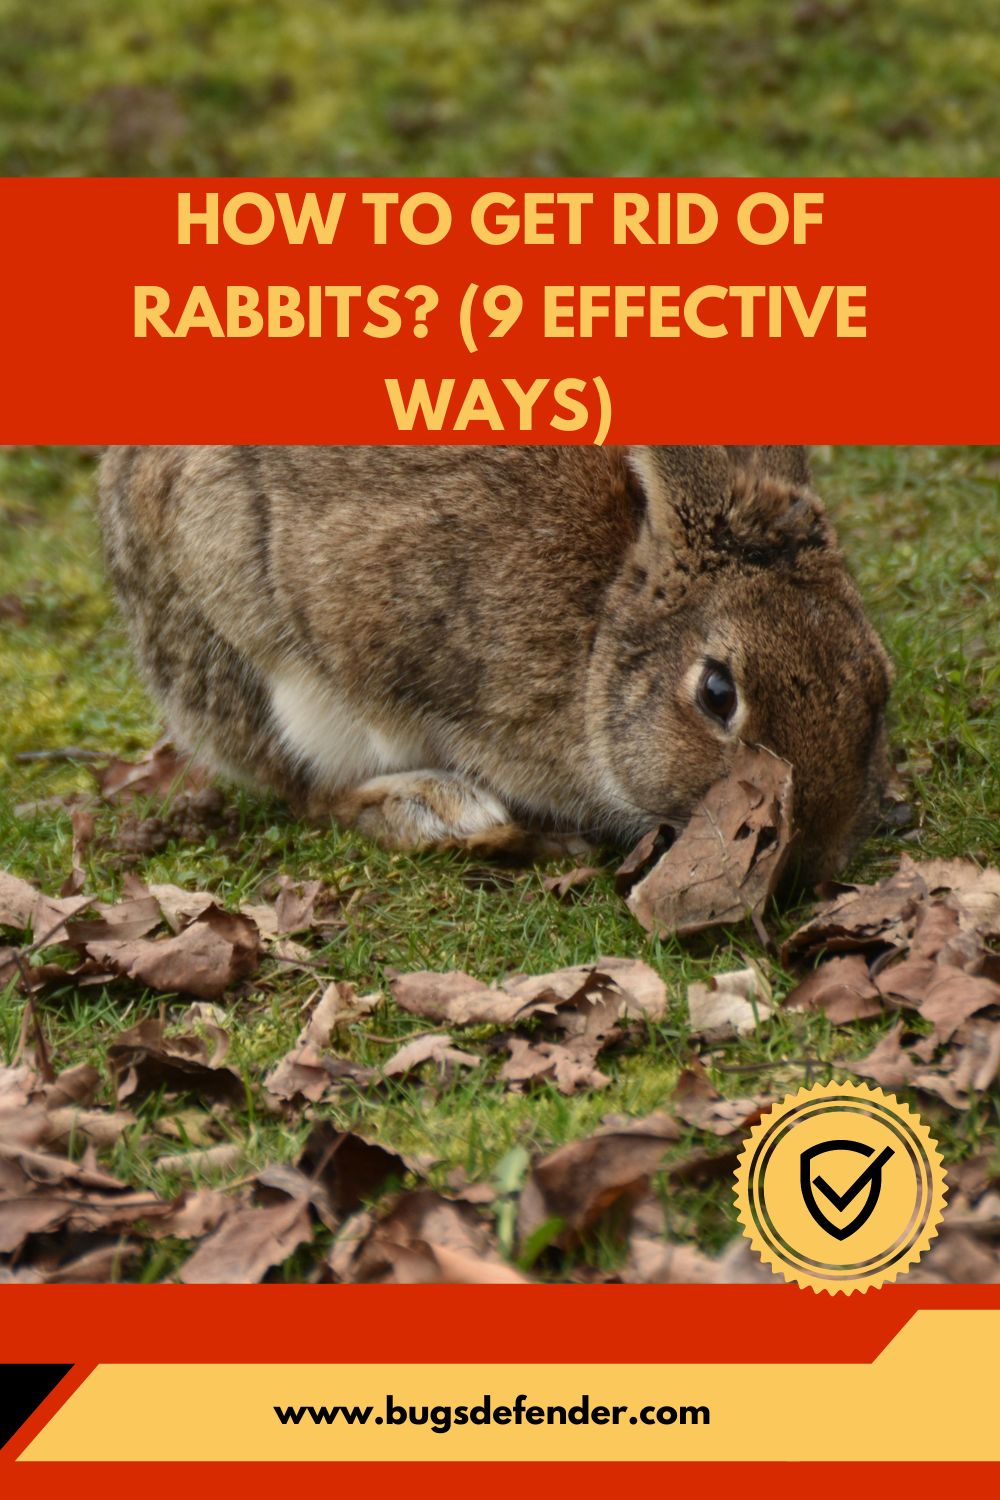 How To Get Rid Of Rabbits? (9 Effective Ways) pin1